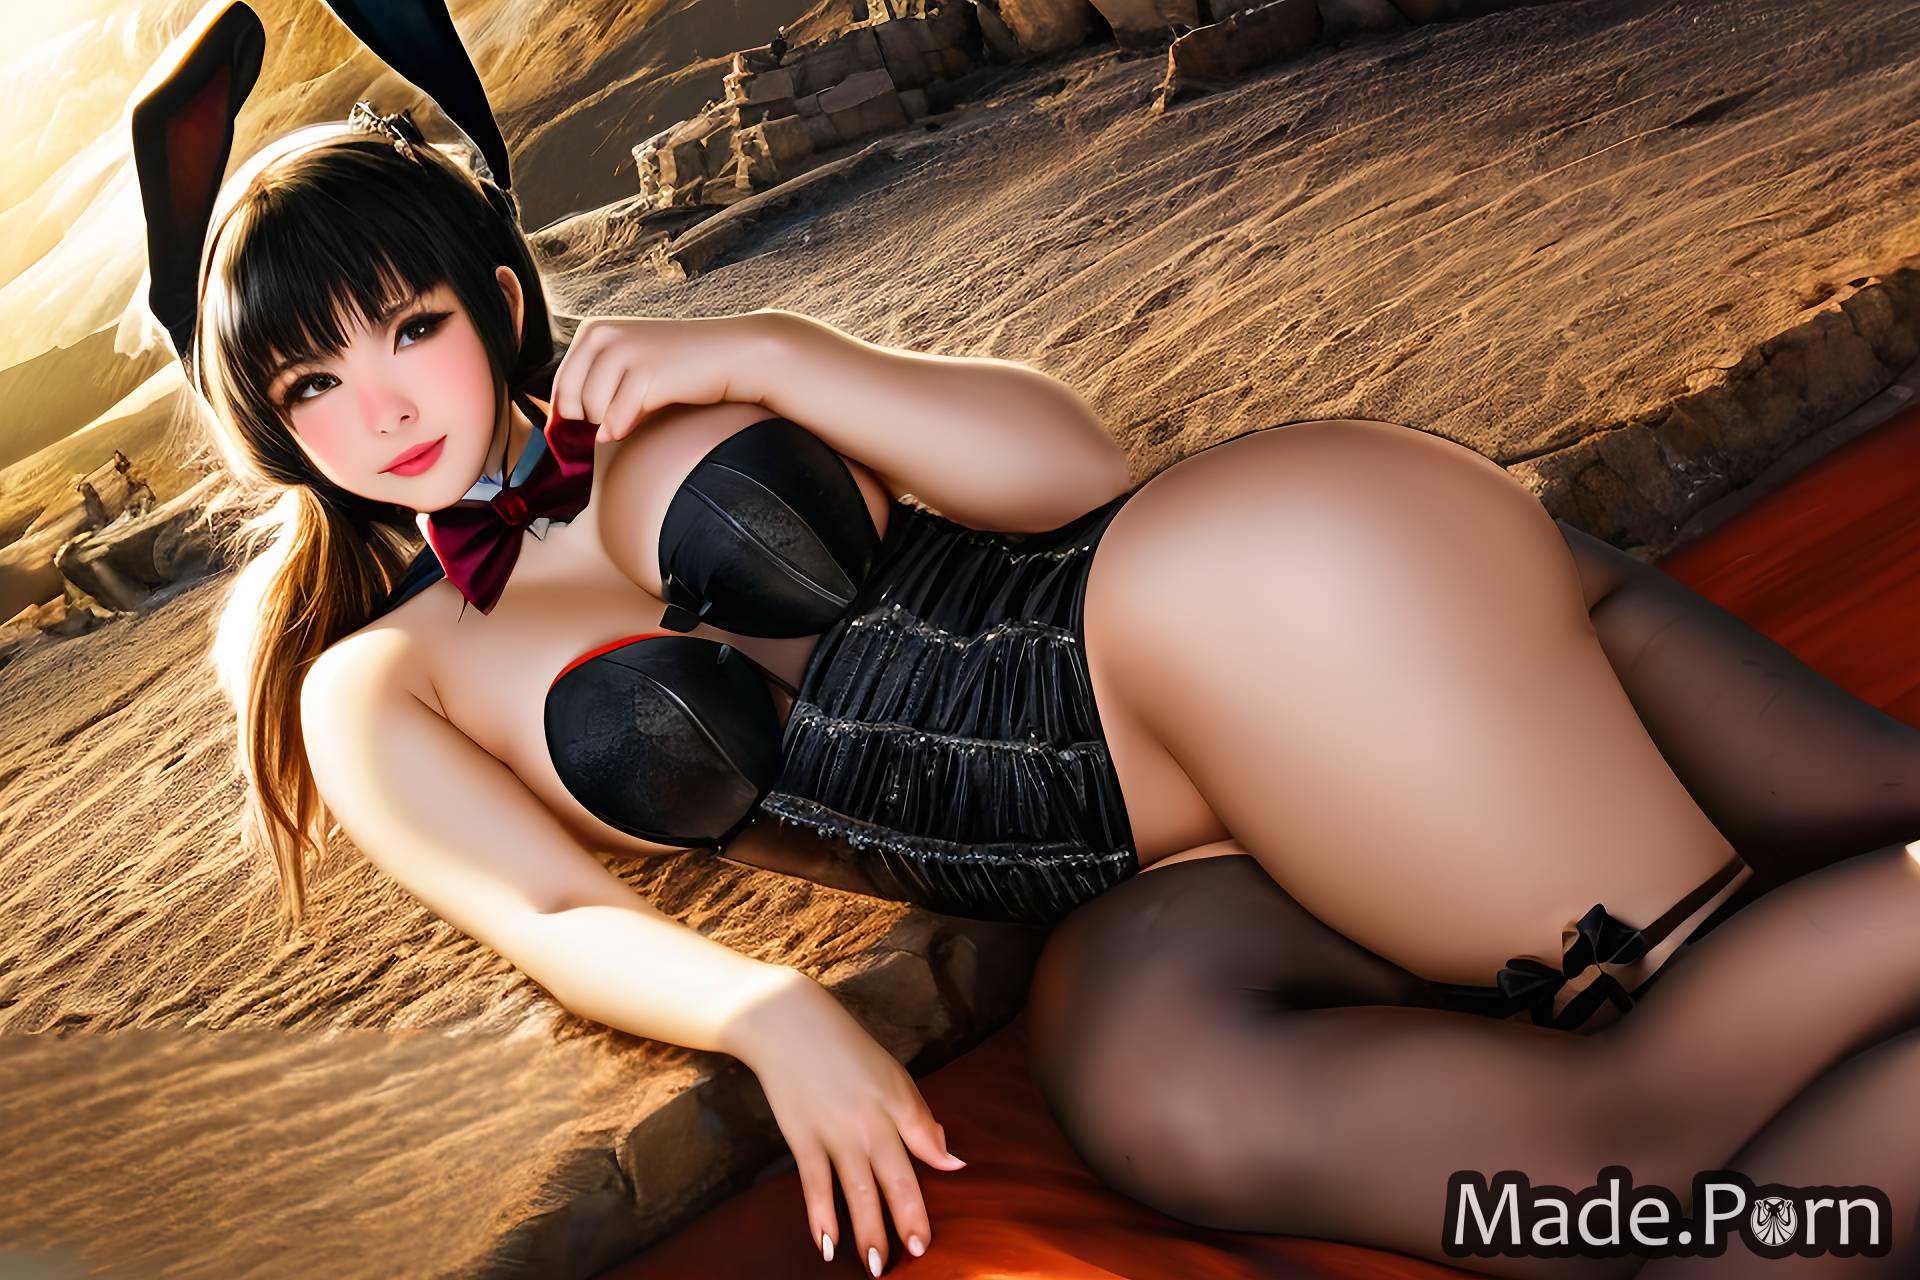 pigtails Great Wall of China strappy heels gay burmese desert bunny ears